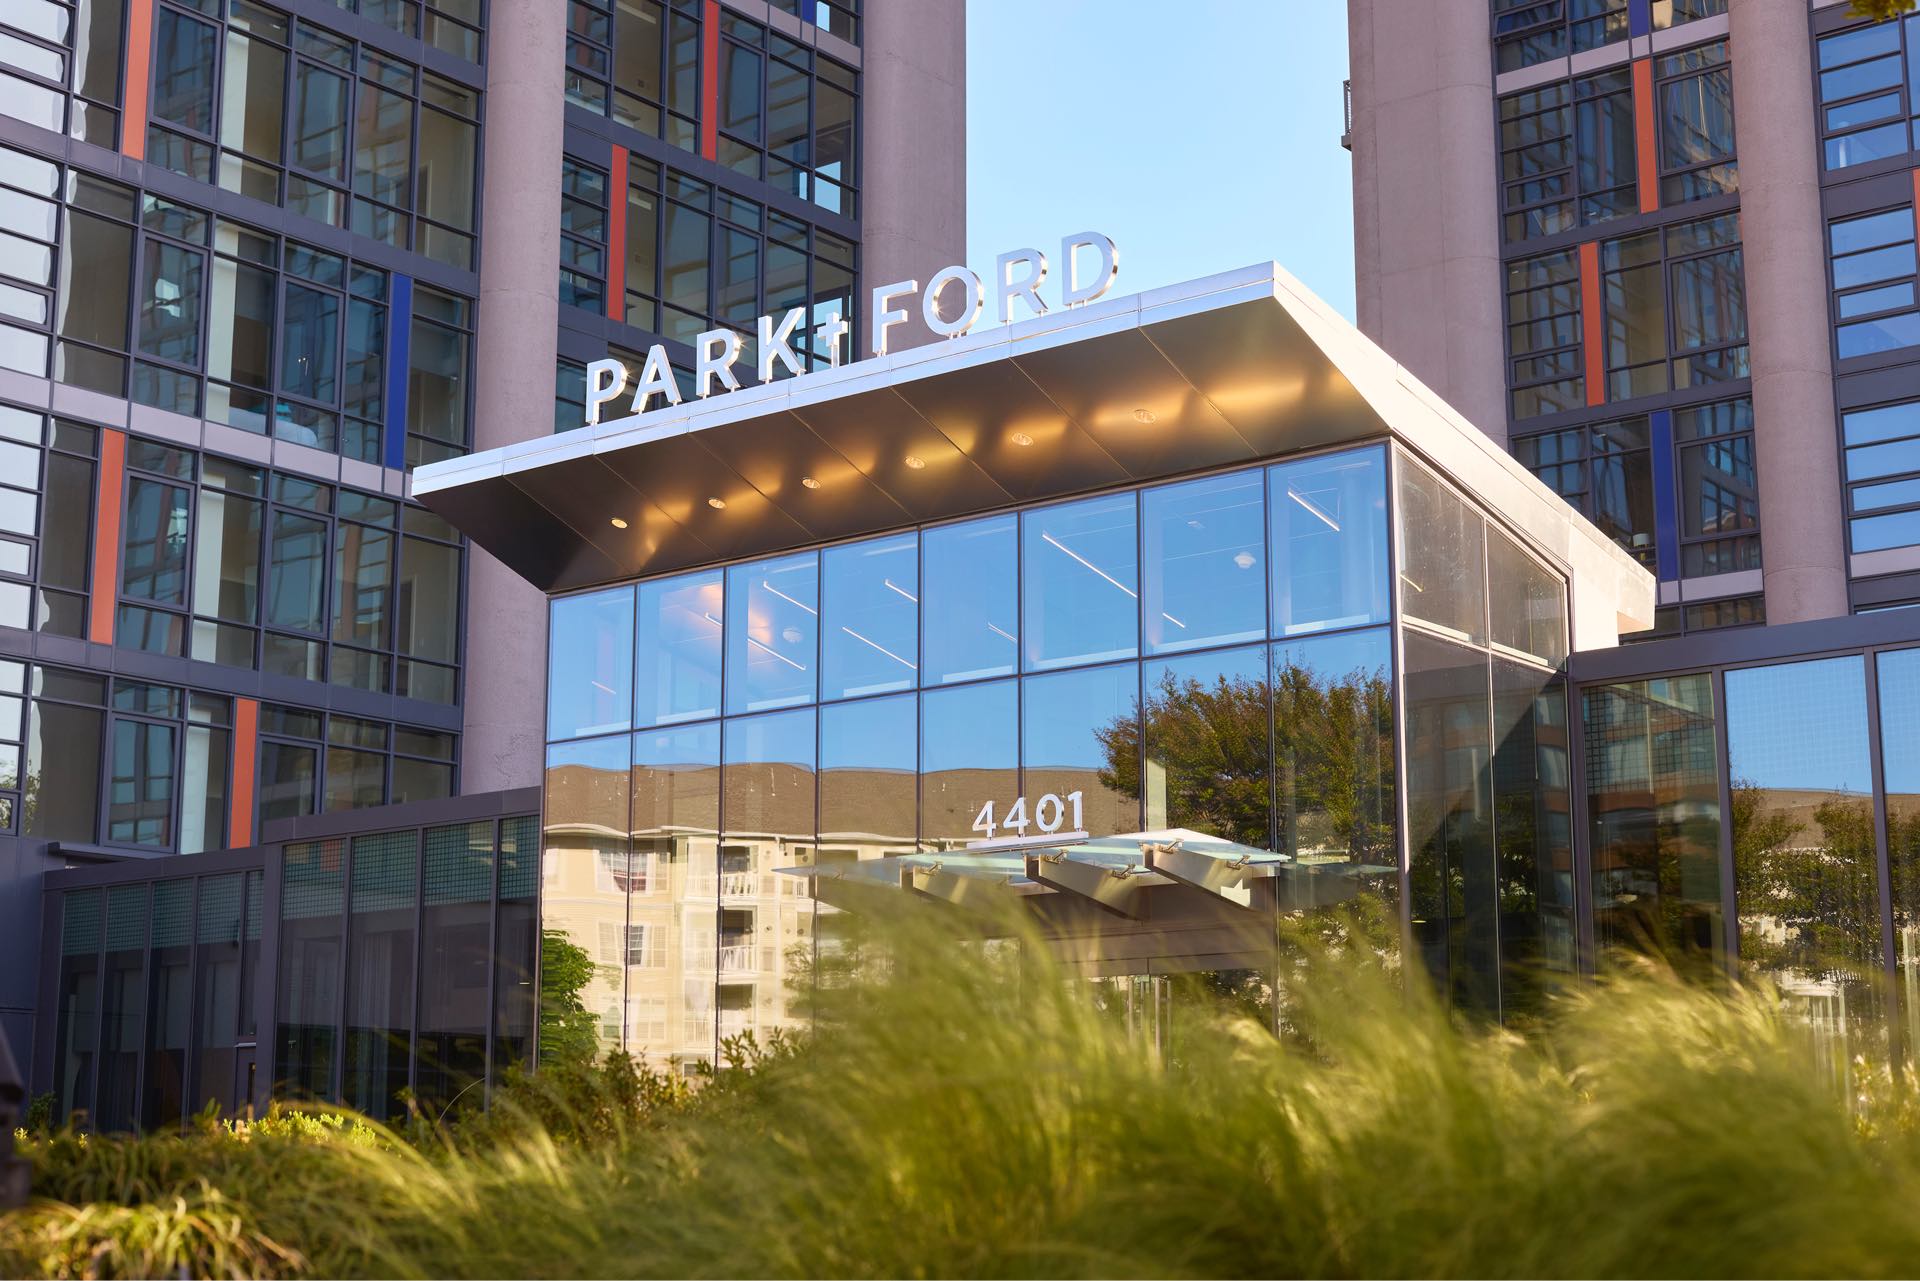 Find out what your future holds at Park + Ford